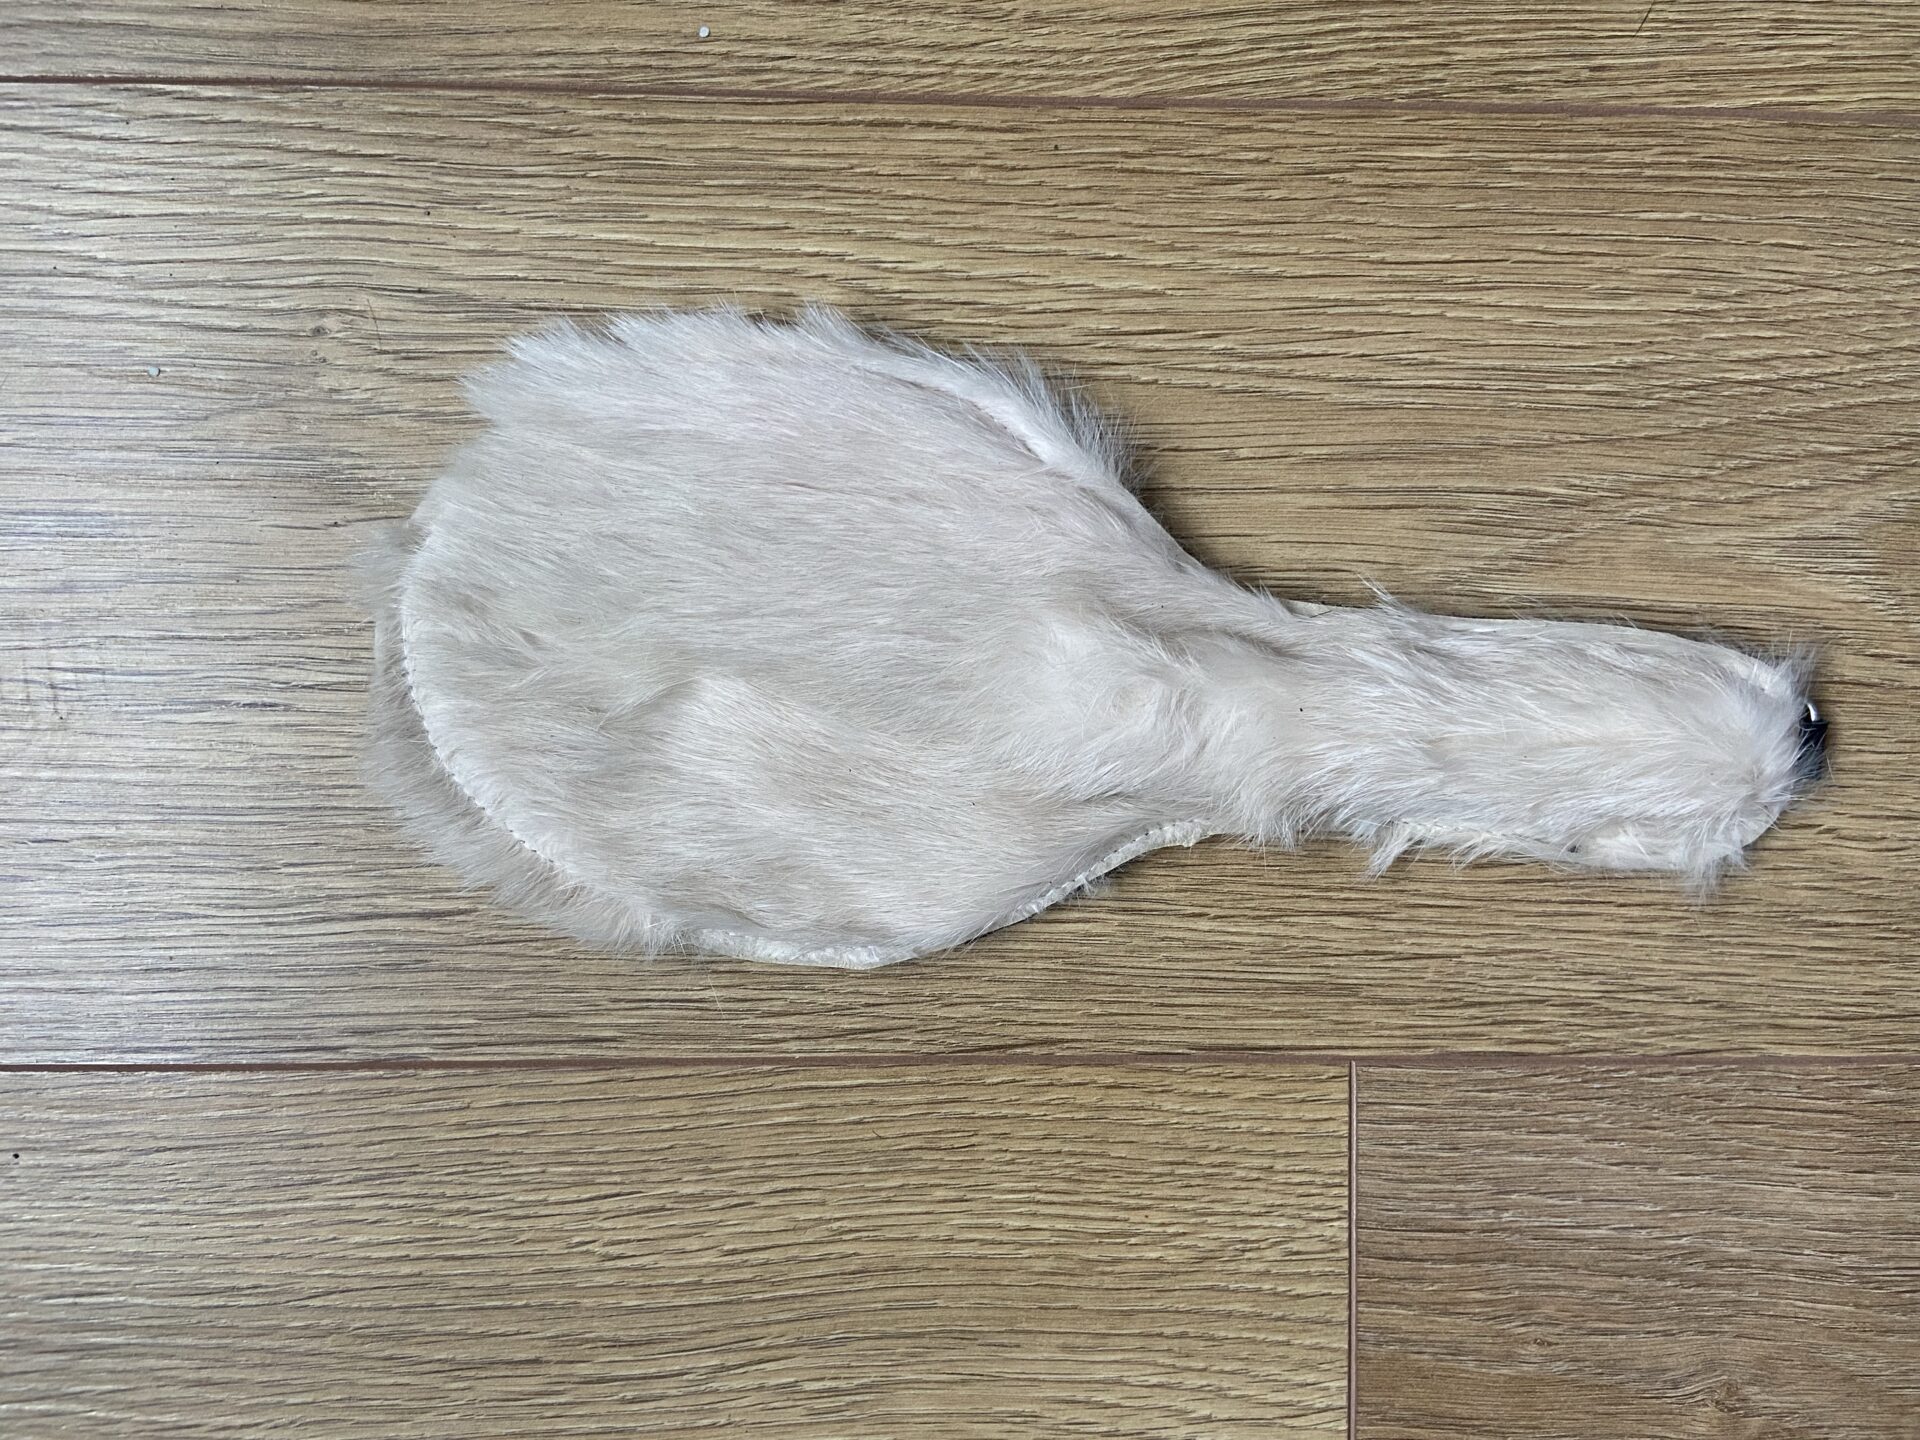 Fur and snakeprint round paddle